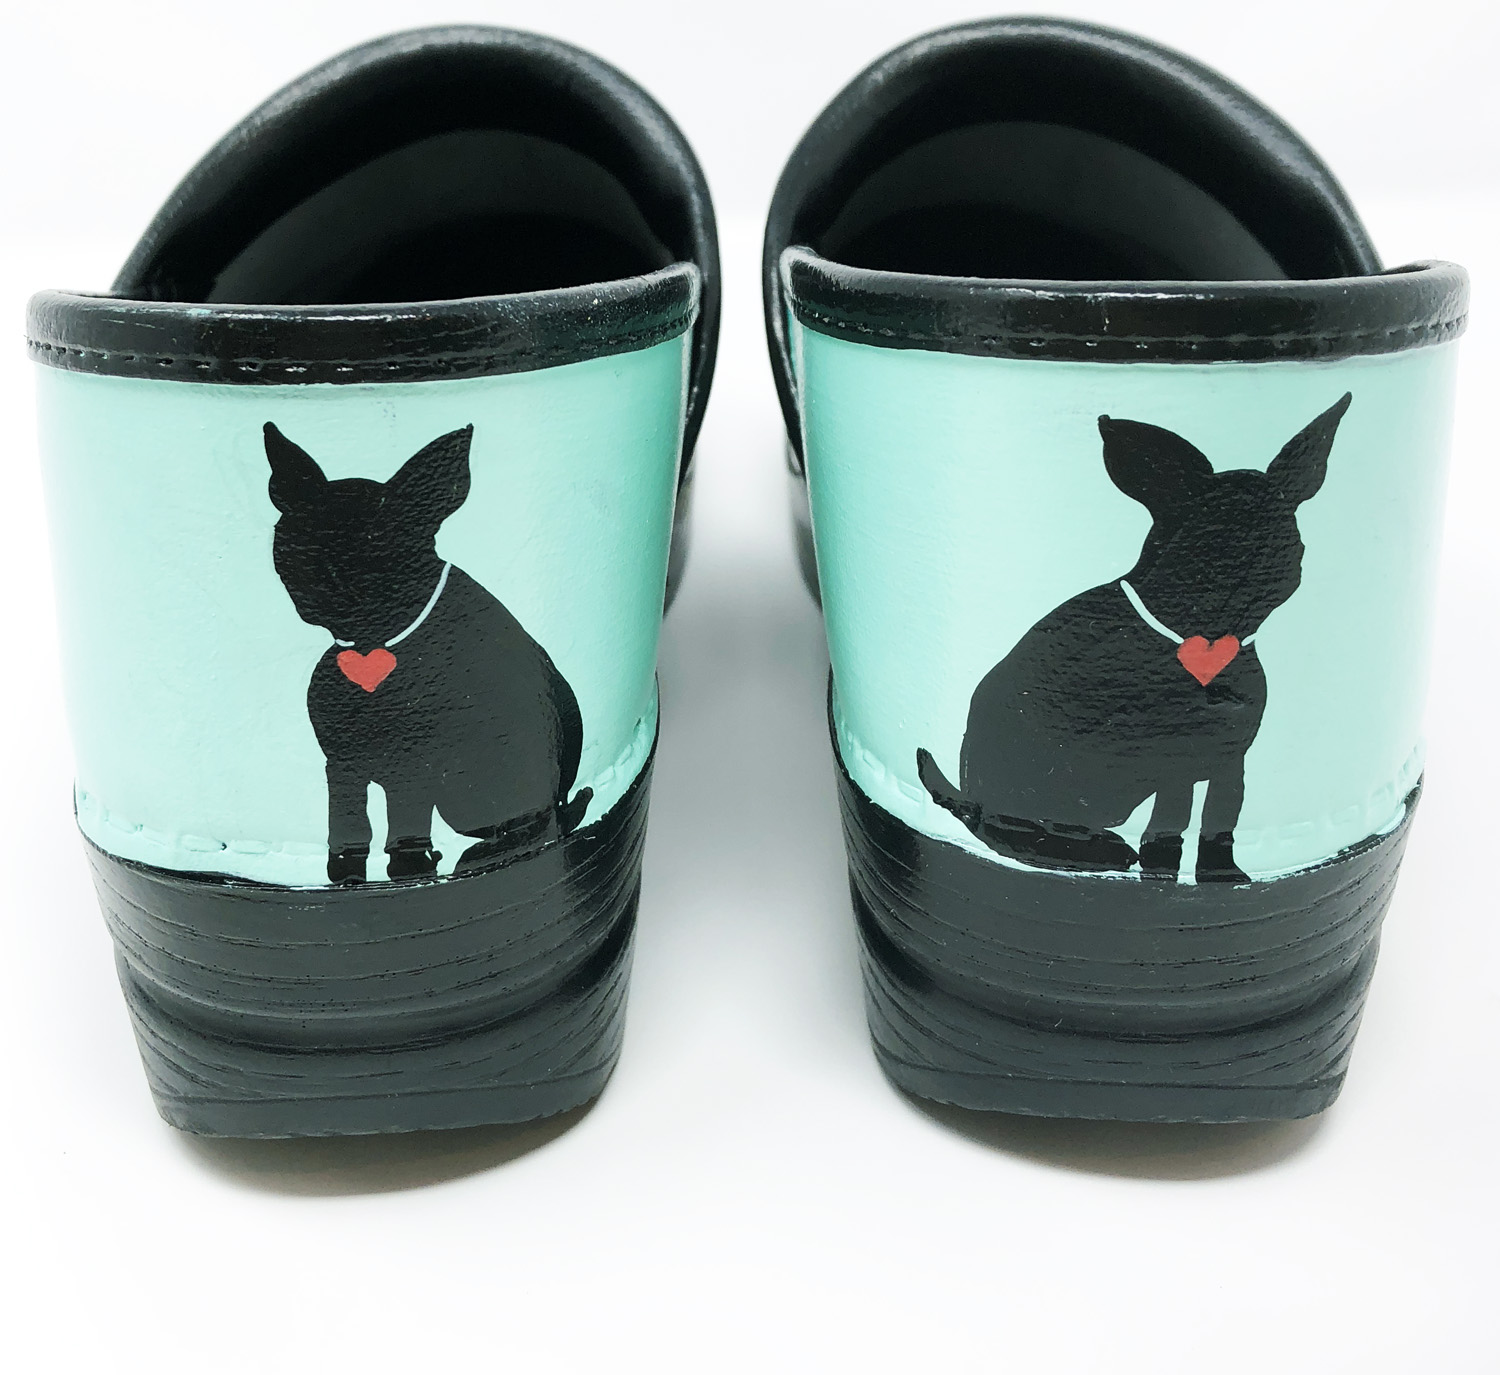 *CUSTOMIZABLE!*　Dansko　Clog　time.　Stand　Day　Dog　out.　Footwear　Hourglass　Afternoon　—　Professional　It's